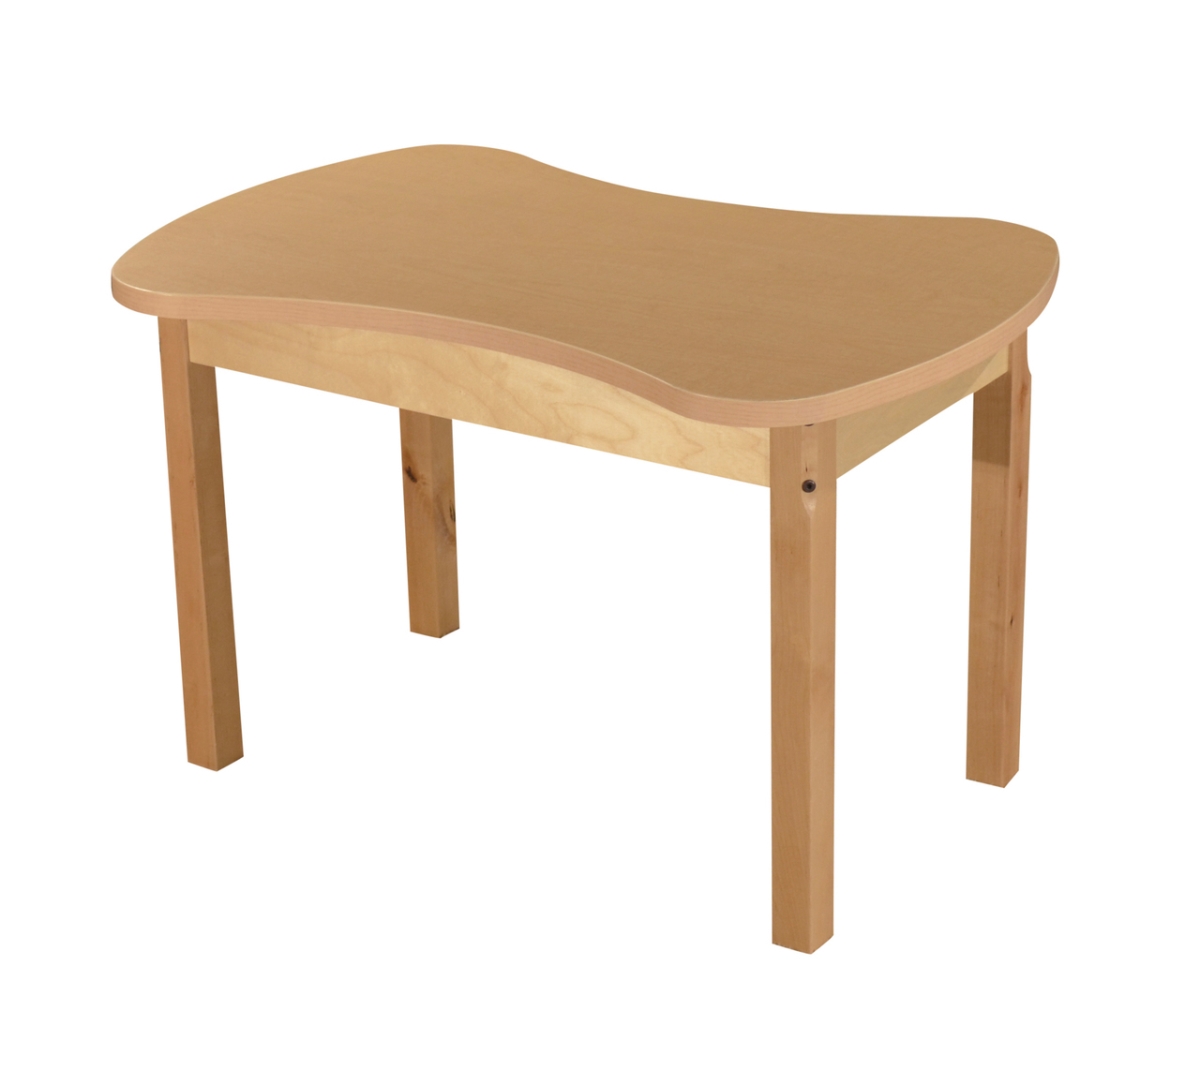 Picture of Wood Designs HPL2436C29 24 x 36 in. Synergy Junction, High Pressure Laminate Table with Hardwood Legs- 29 in.